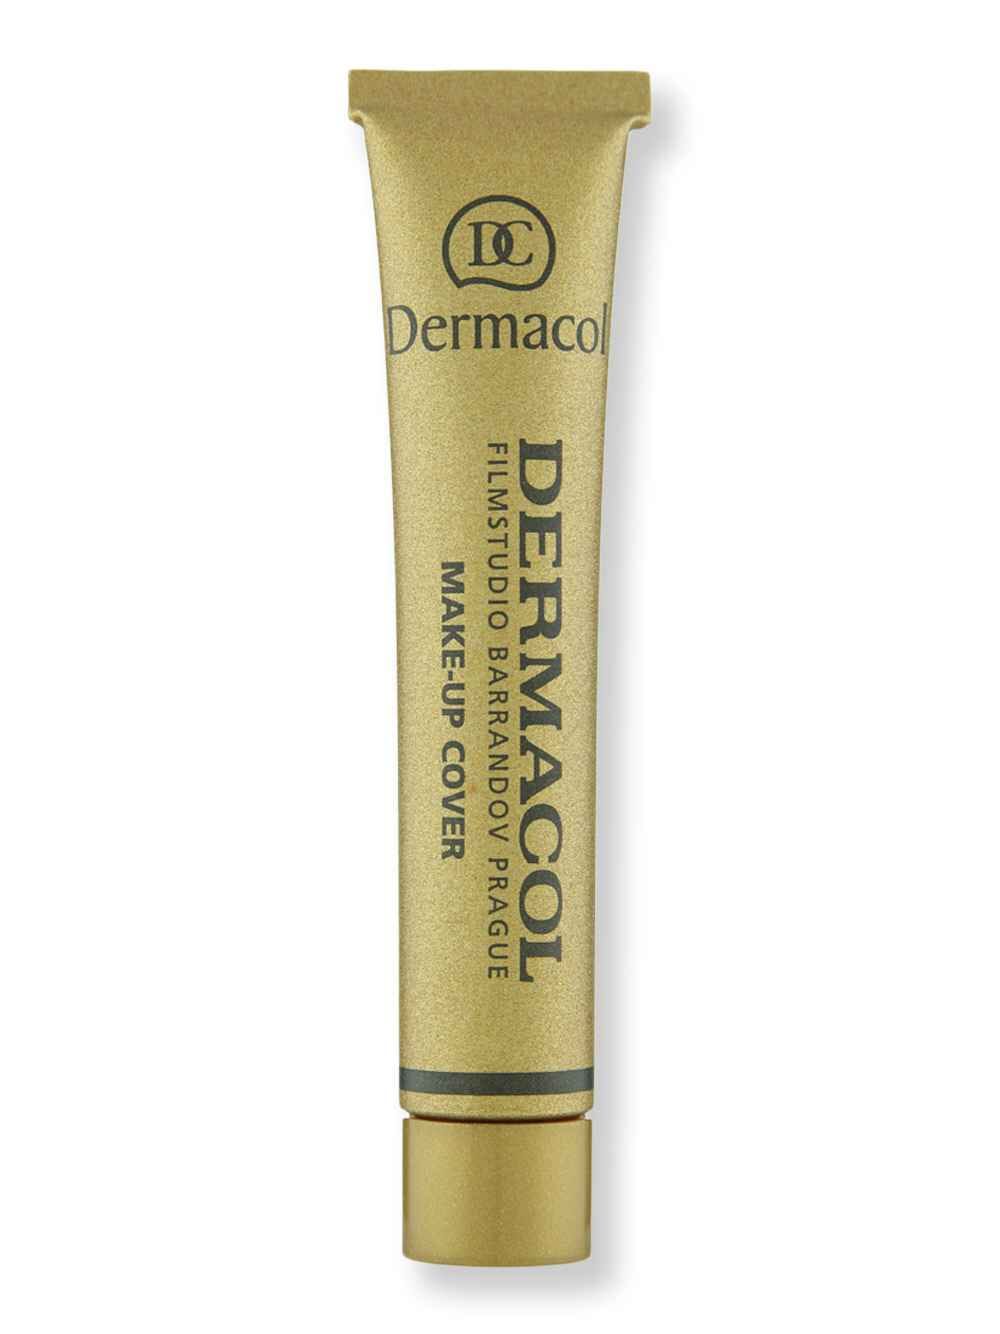 Dermacol Dermacol Make-up Cover 30 g212 Tinted Moisturizers & Foundations 